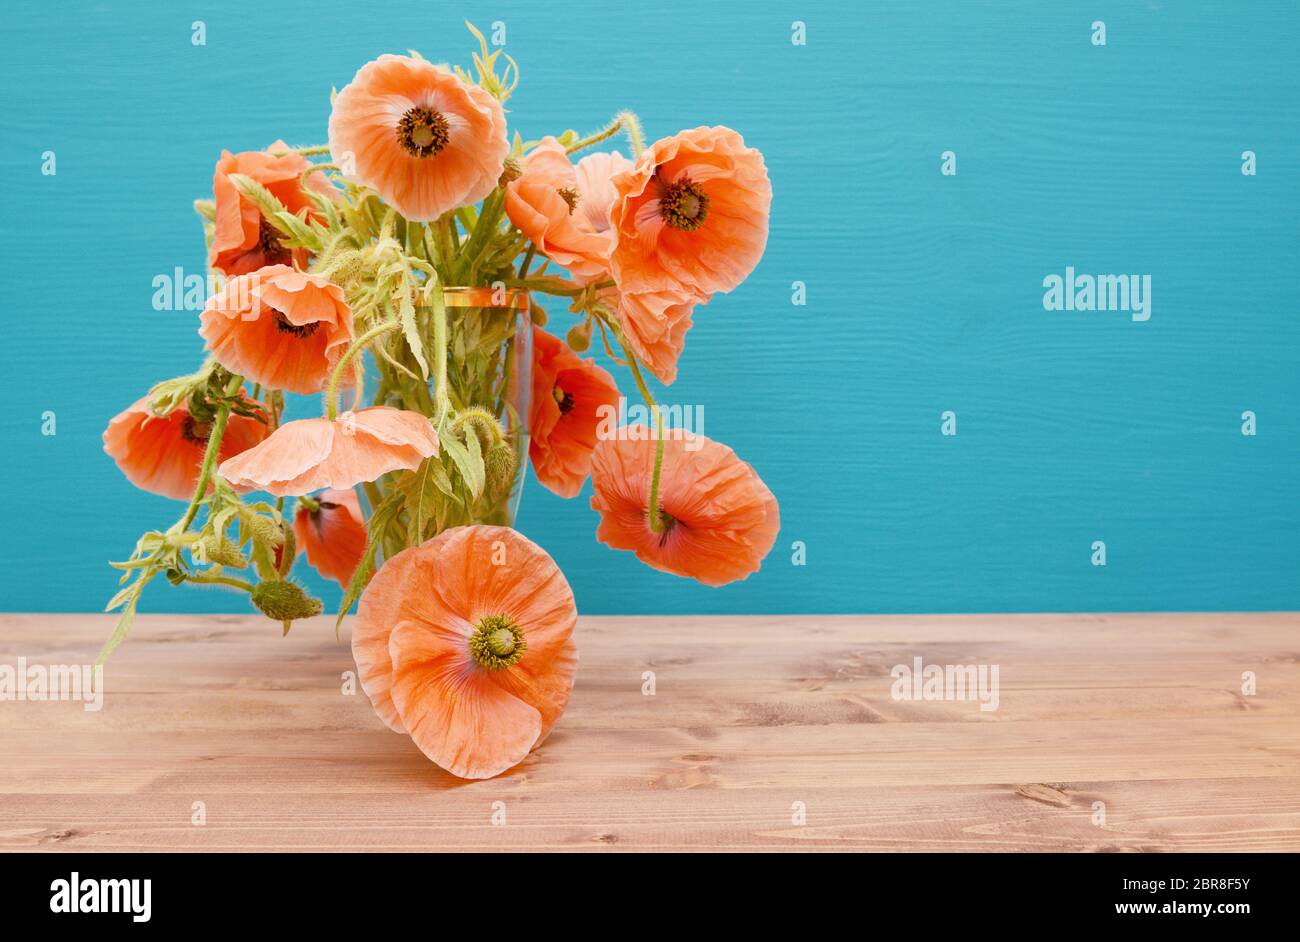 Numerous beautiful cut pink poppies with long winding stems, overflow from a glass vase on a wooden table, against a painted turquoise background Stock Photo